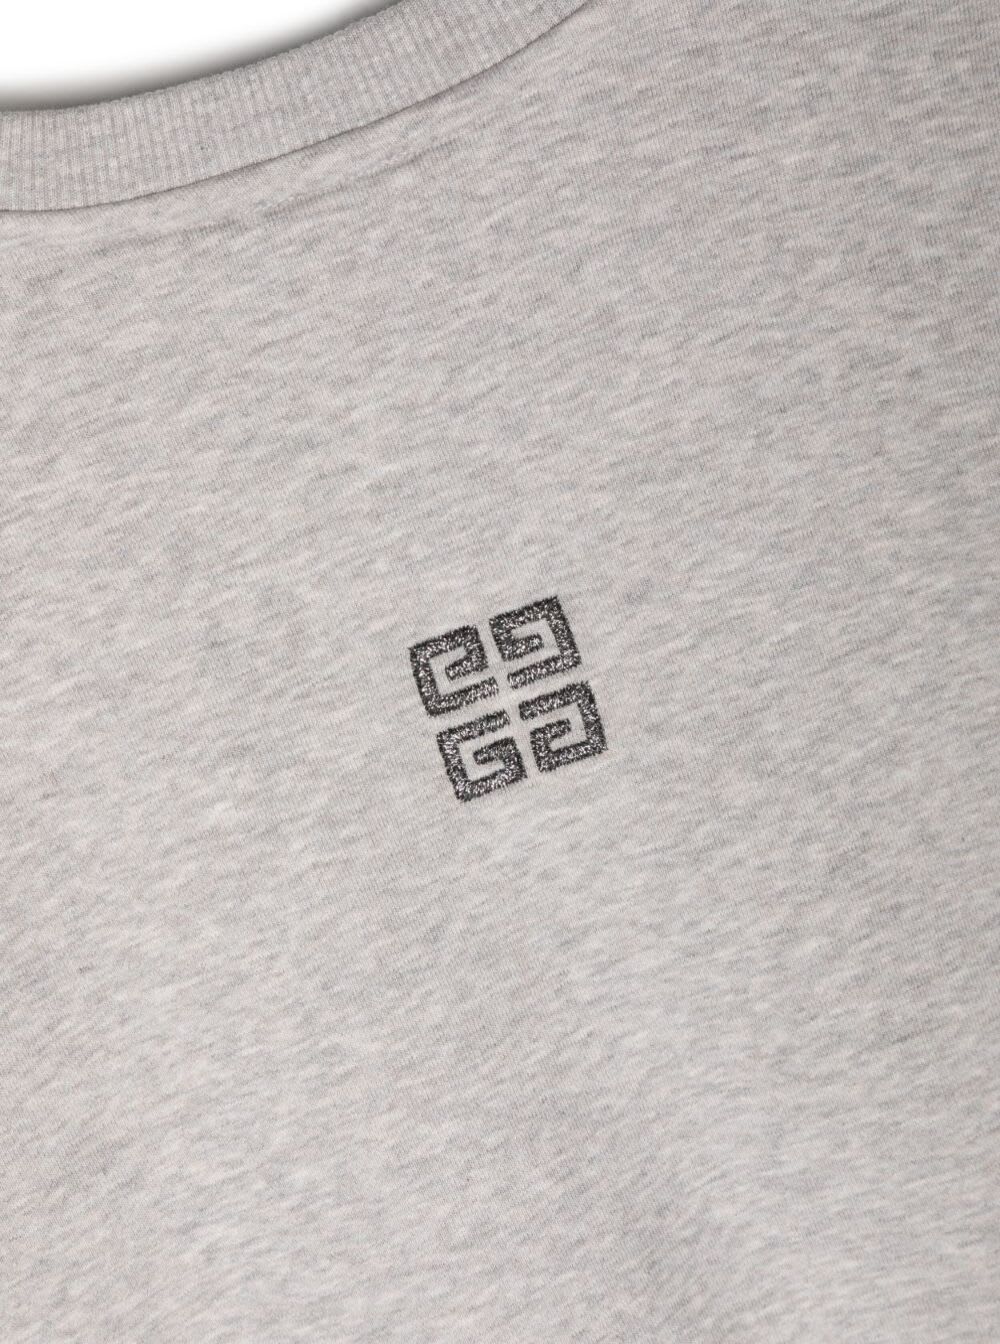 Shop Givenchy Grey Cropped Sweatshirt With Glitter Logo Print And 4g Motif In Cotton Girl